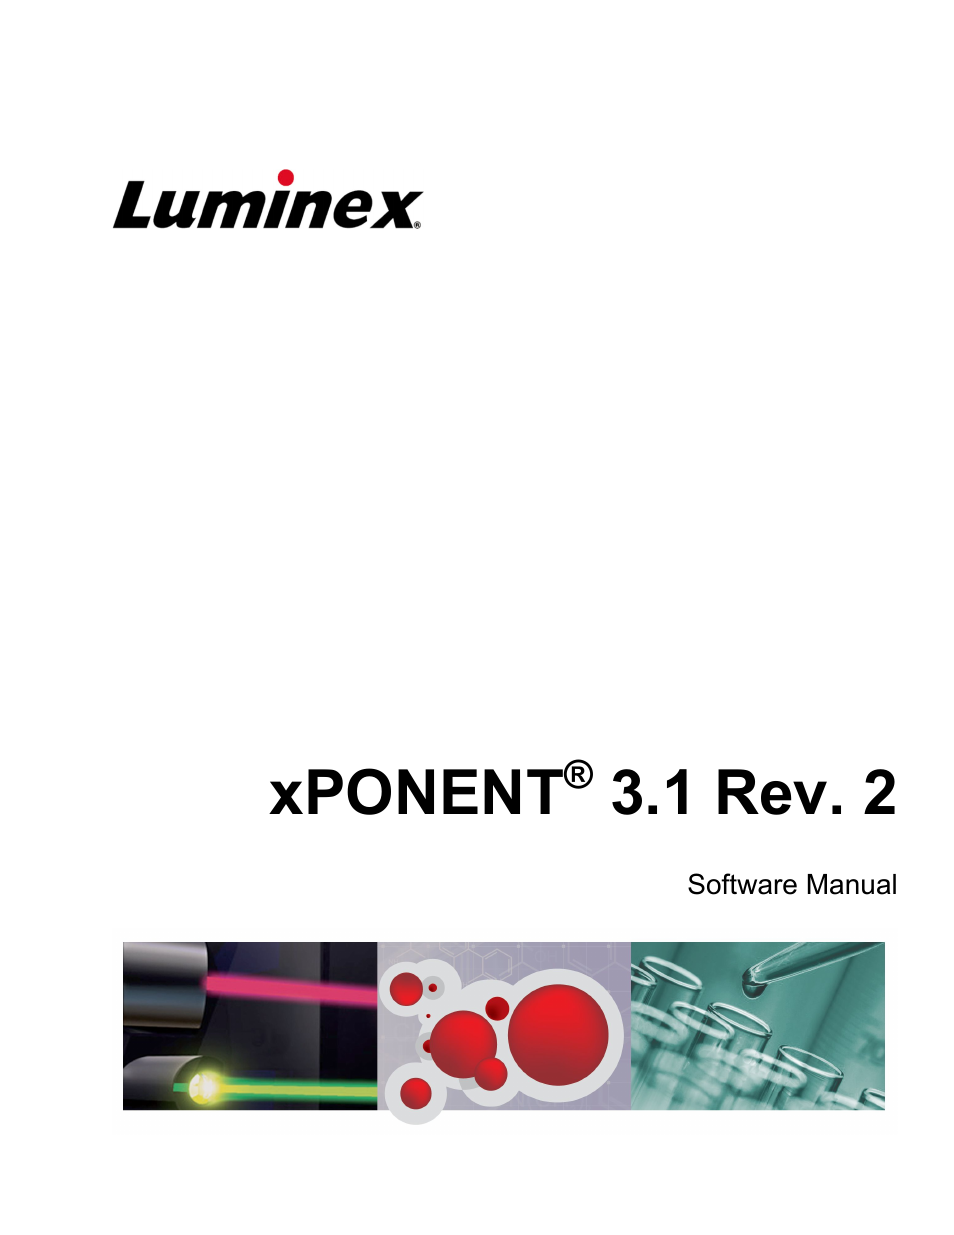 Luminex xPONENT 3.1 Rev 2 User Manual | 145 pages